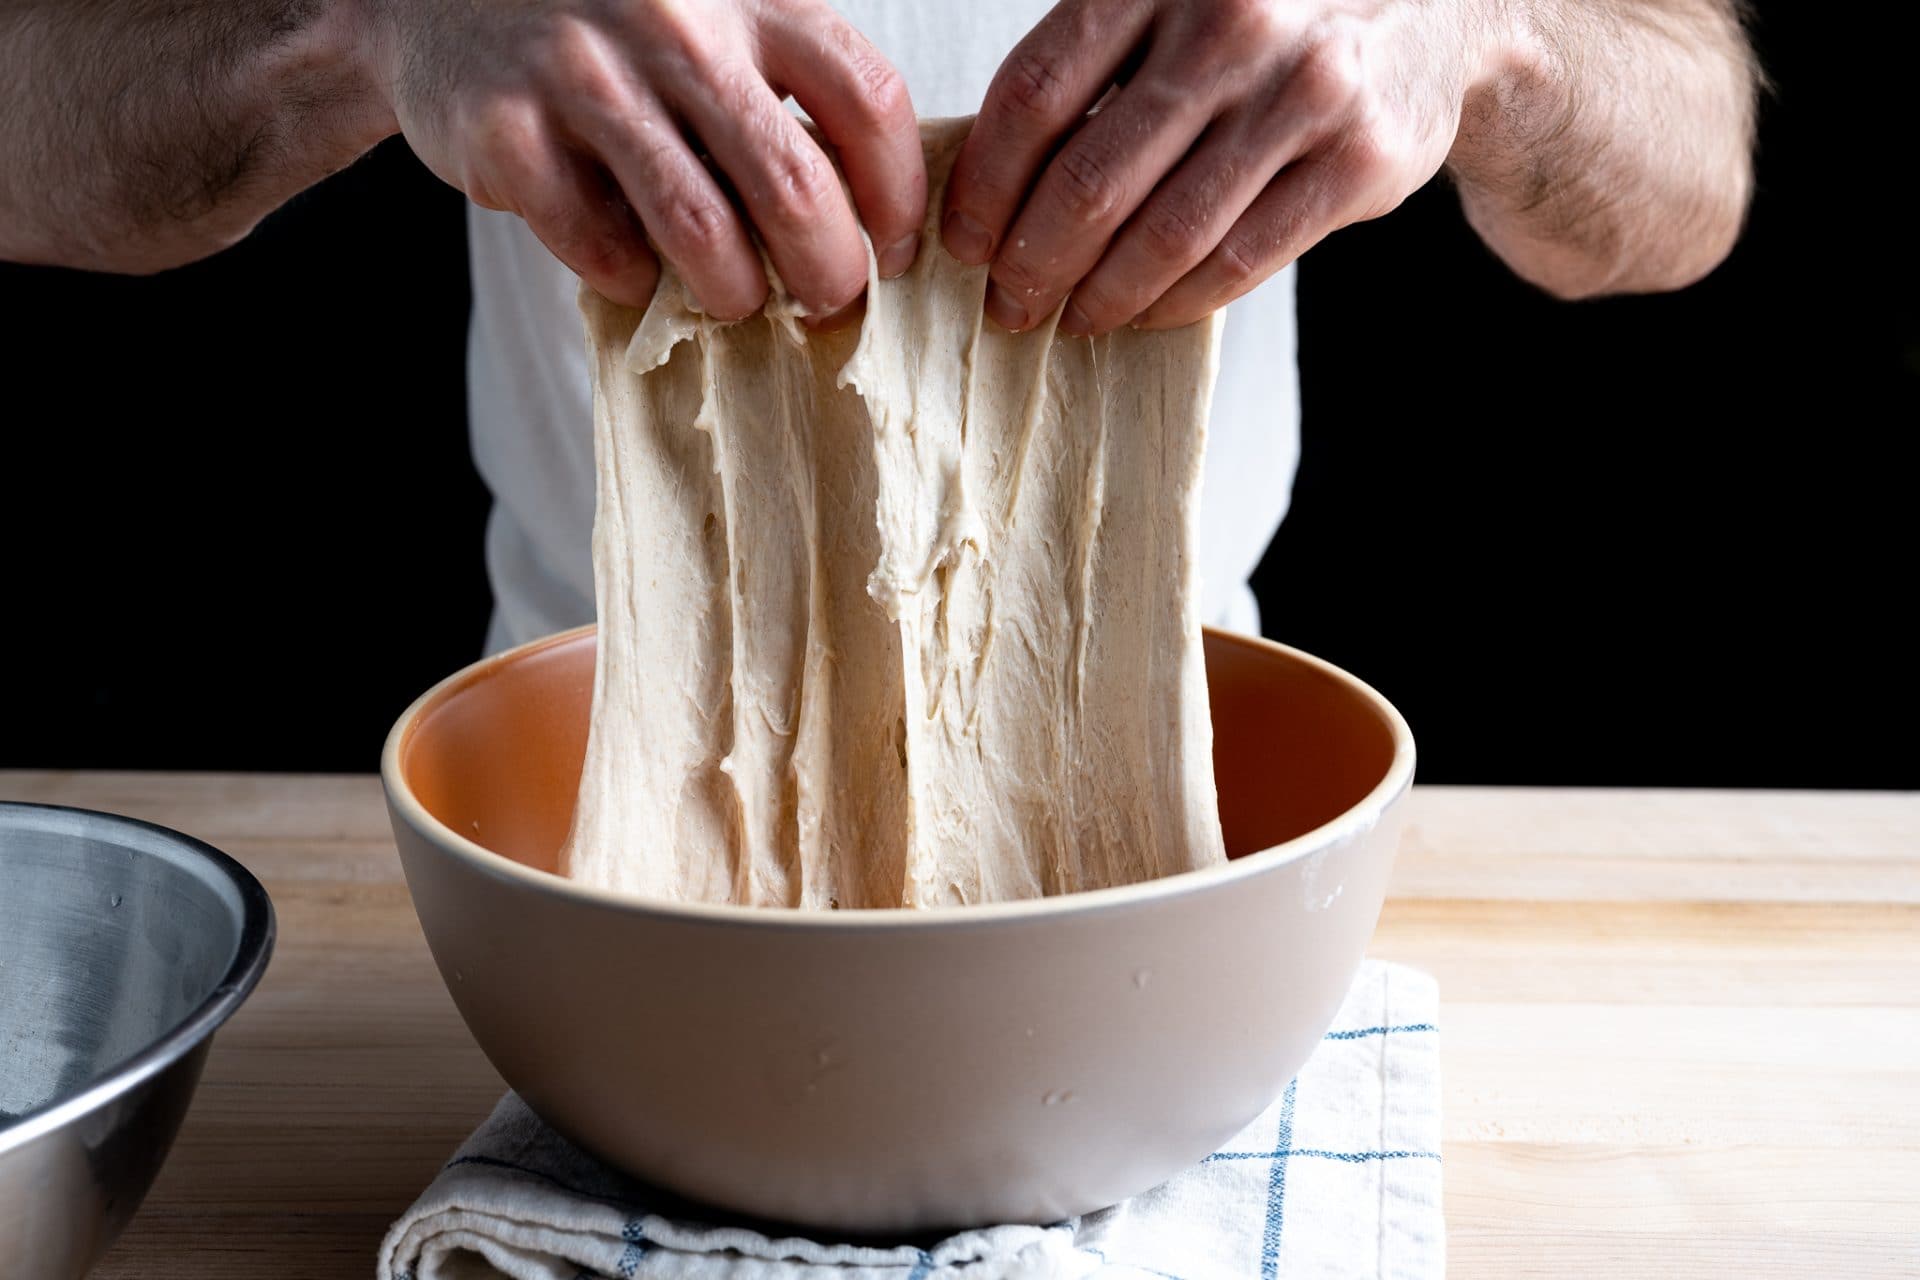 Stretches and folds during bulk fermentation